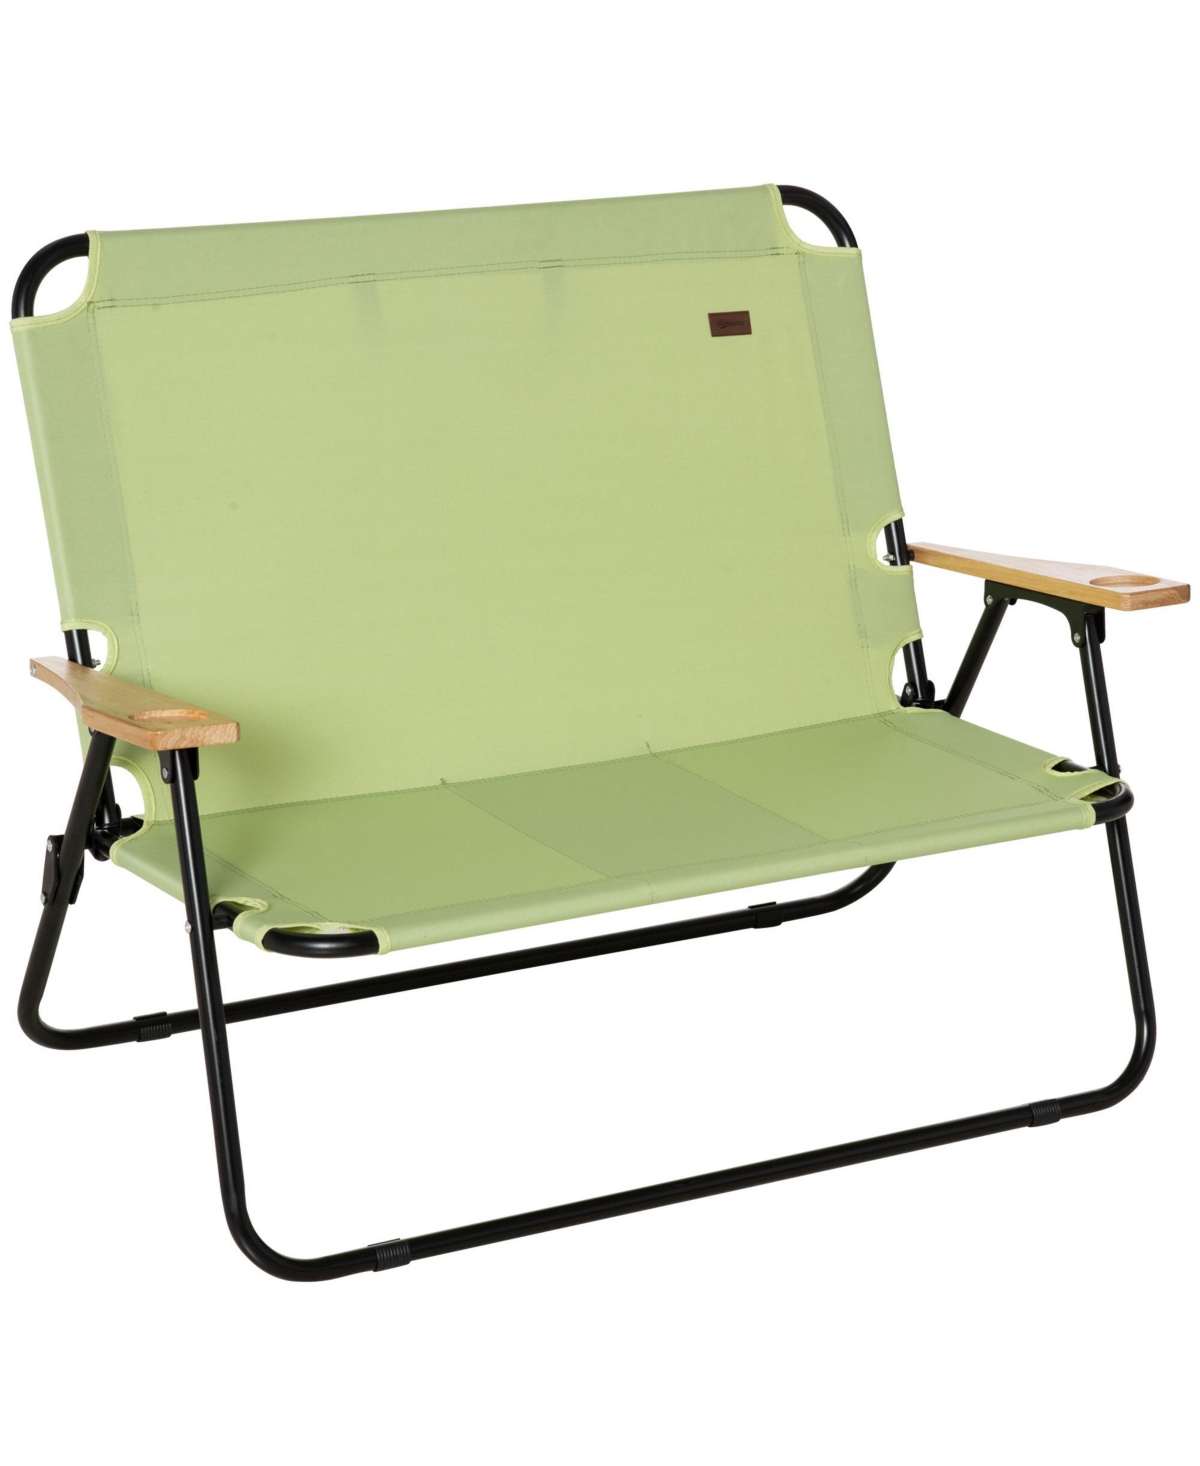 Double Camping Chair for 2 Person, Folding Loveseat with Cup Holder and Wood Armrests, for Beach Sports Travel, Green - Green